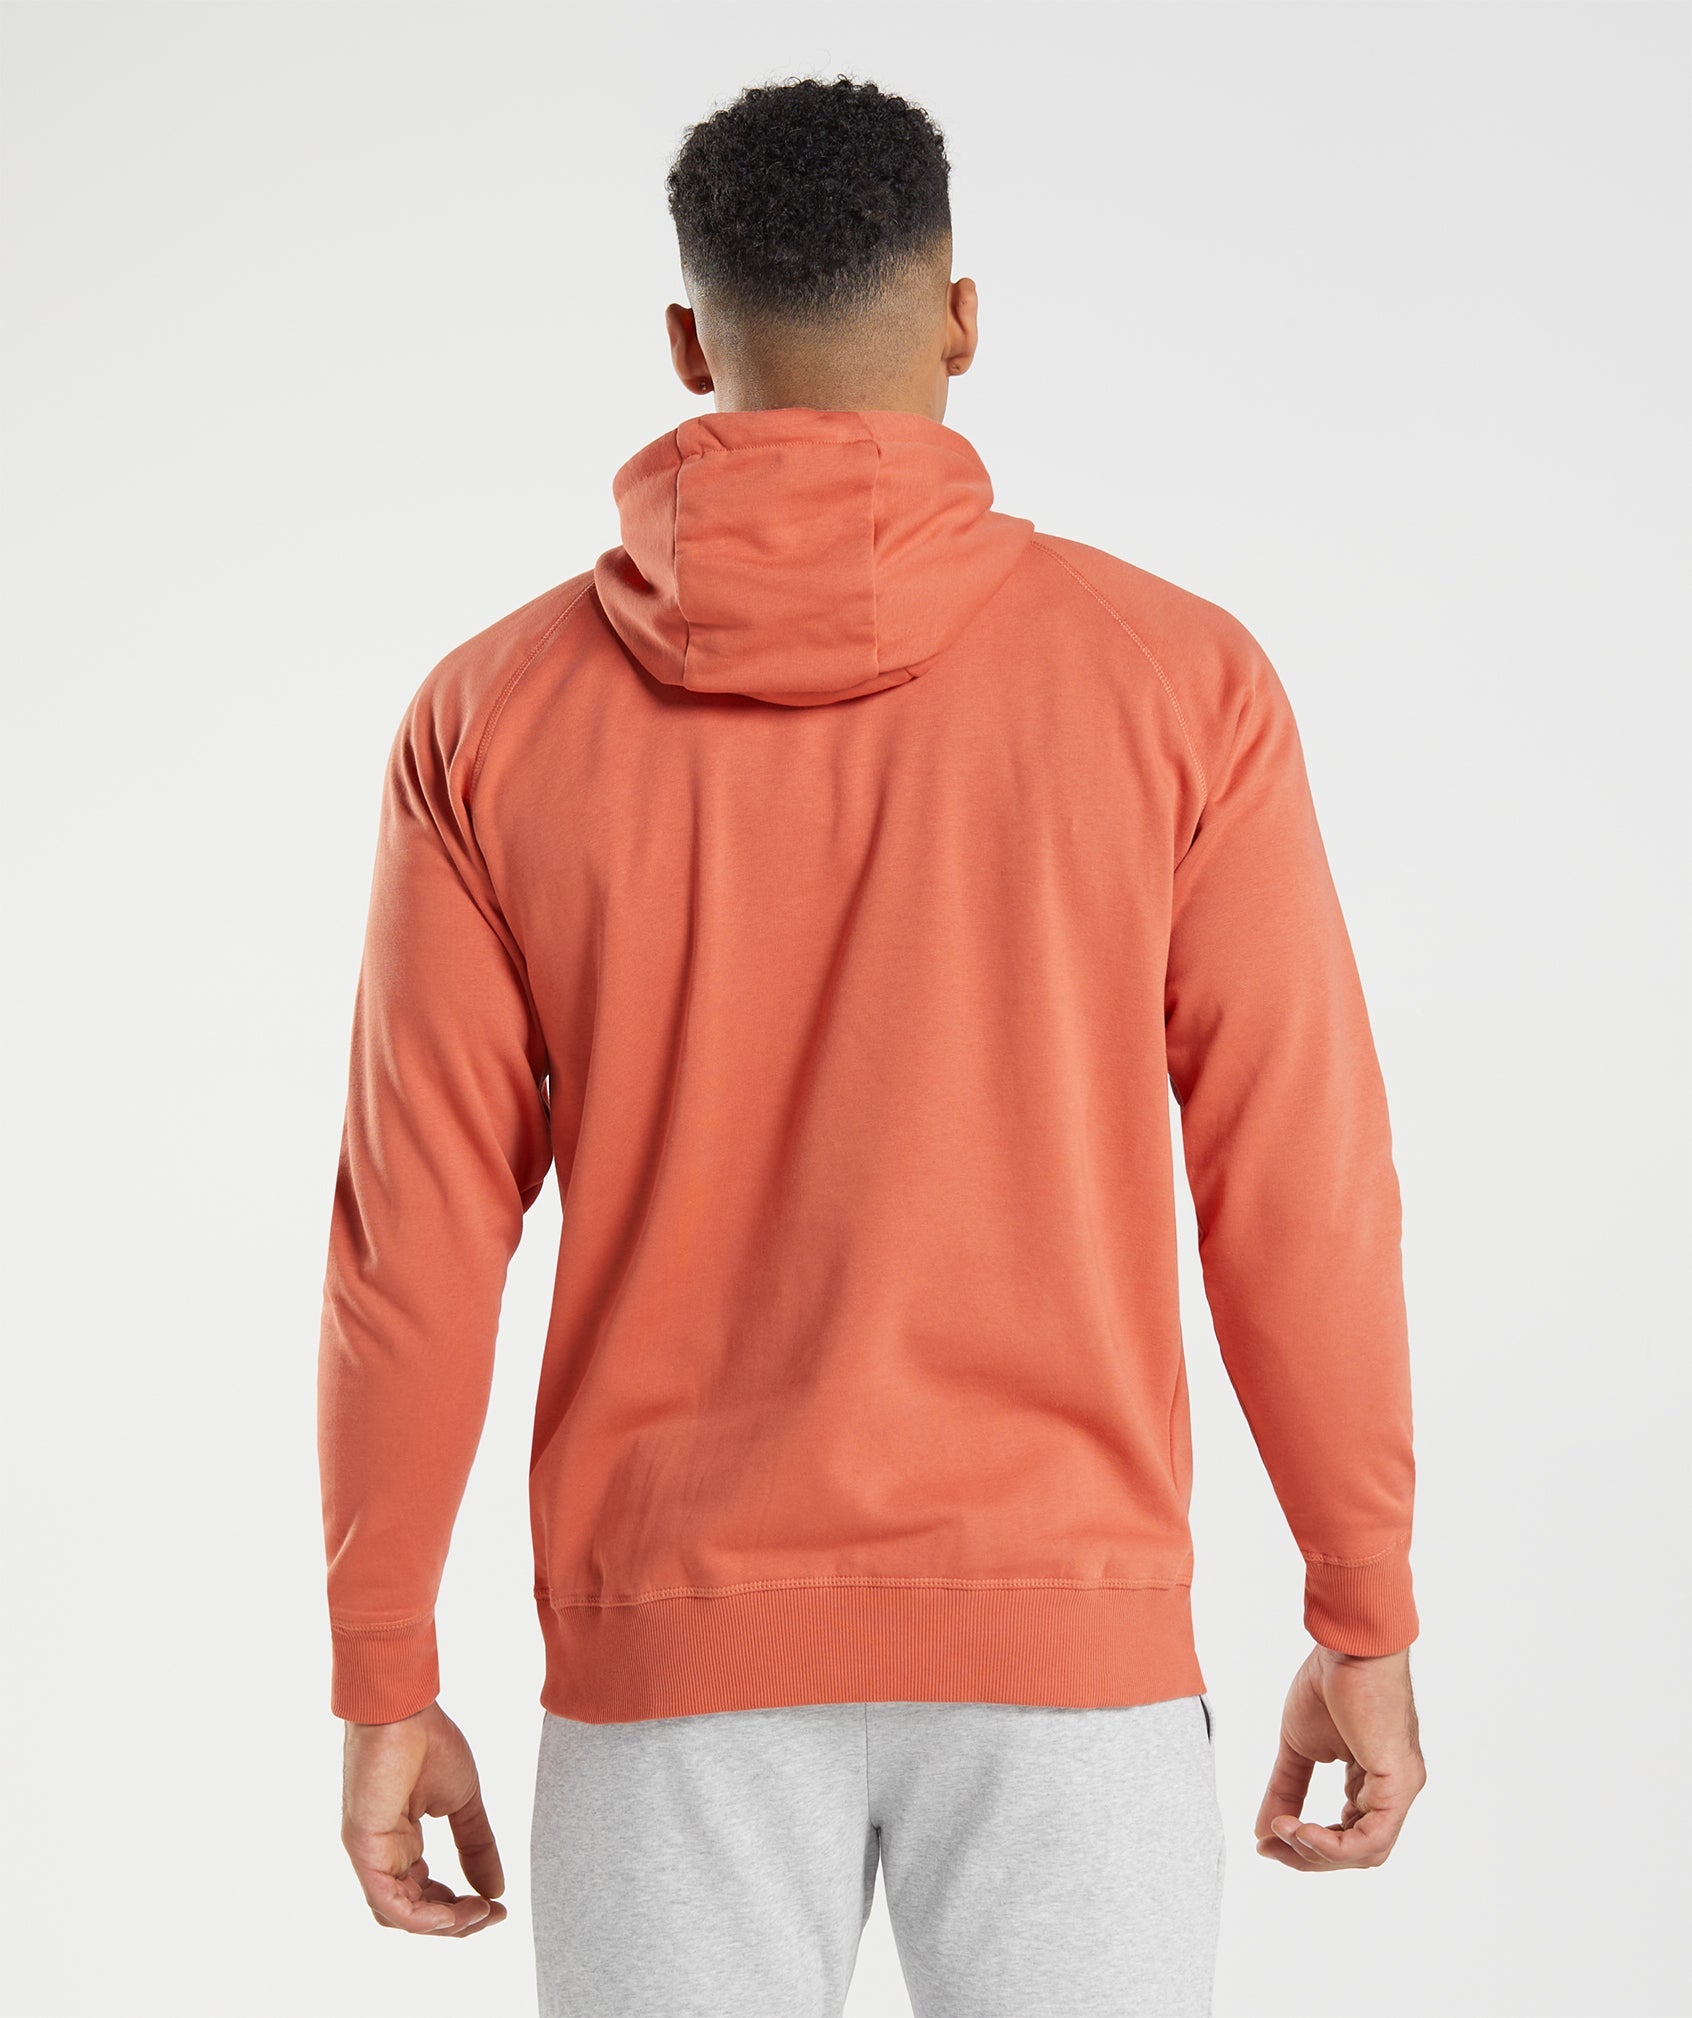 Apollo Hoodie in Storm Red